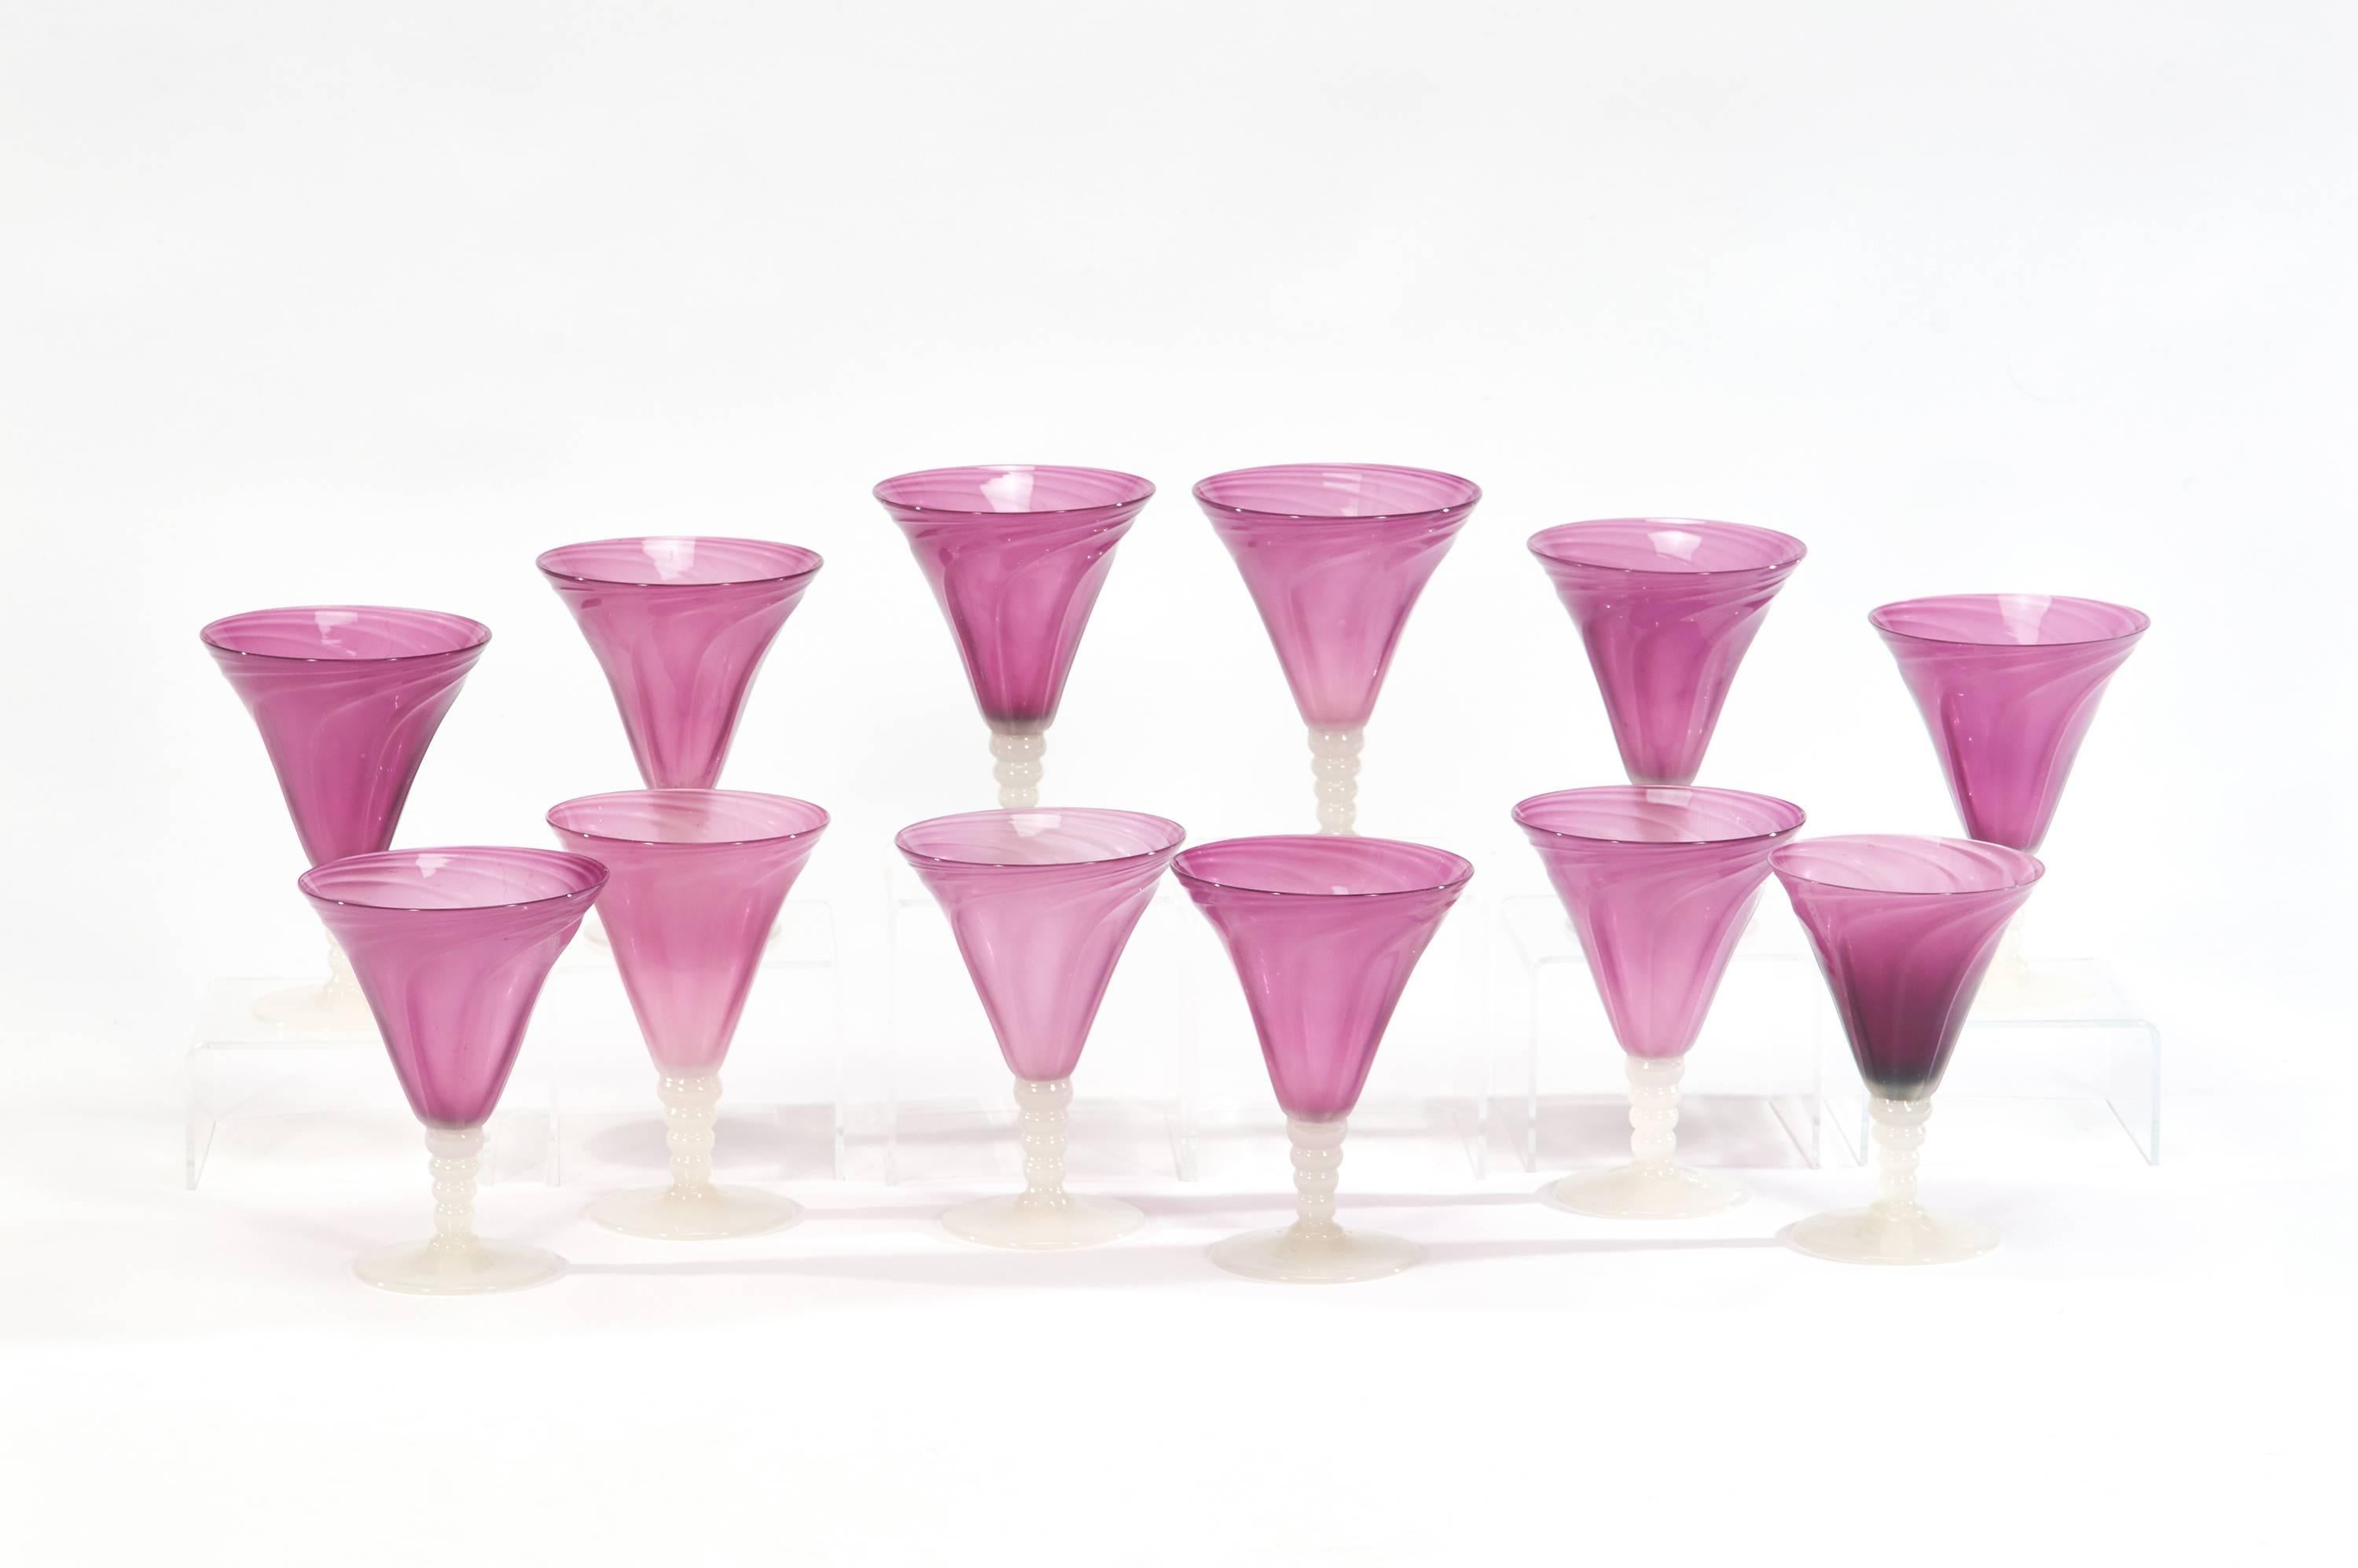 One is lucky to find a single example of this goblet but this is a set of 12 handblown lavender goblets made by Stevens and Williams. These predate the arrival of Frederick Carder at Steuben, when he was an artist and designer at Stevens & Williams